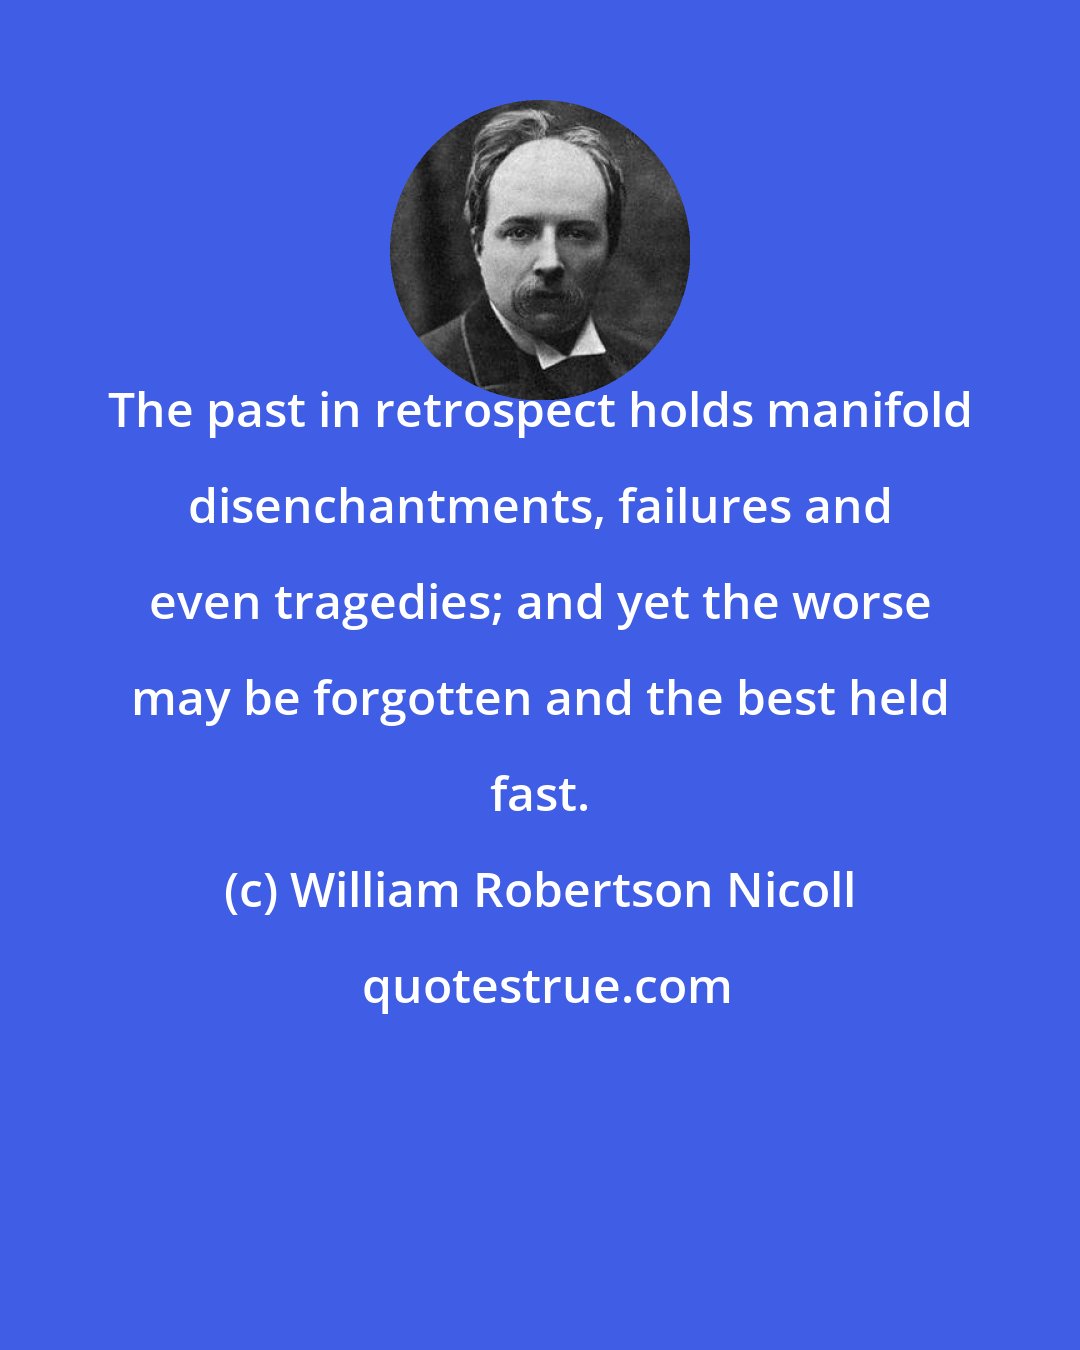 William Robertson Nicoll: The past in retrospect holds manifold disenchantments, failures and even tragedies; and yet the worse may be forgotten and the best held fast.